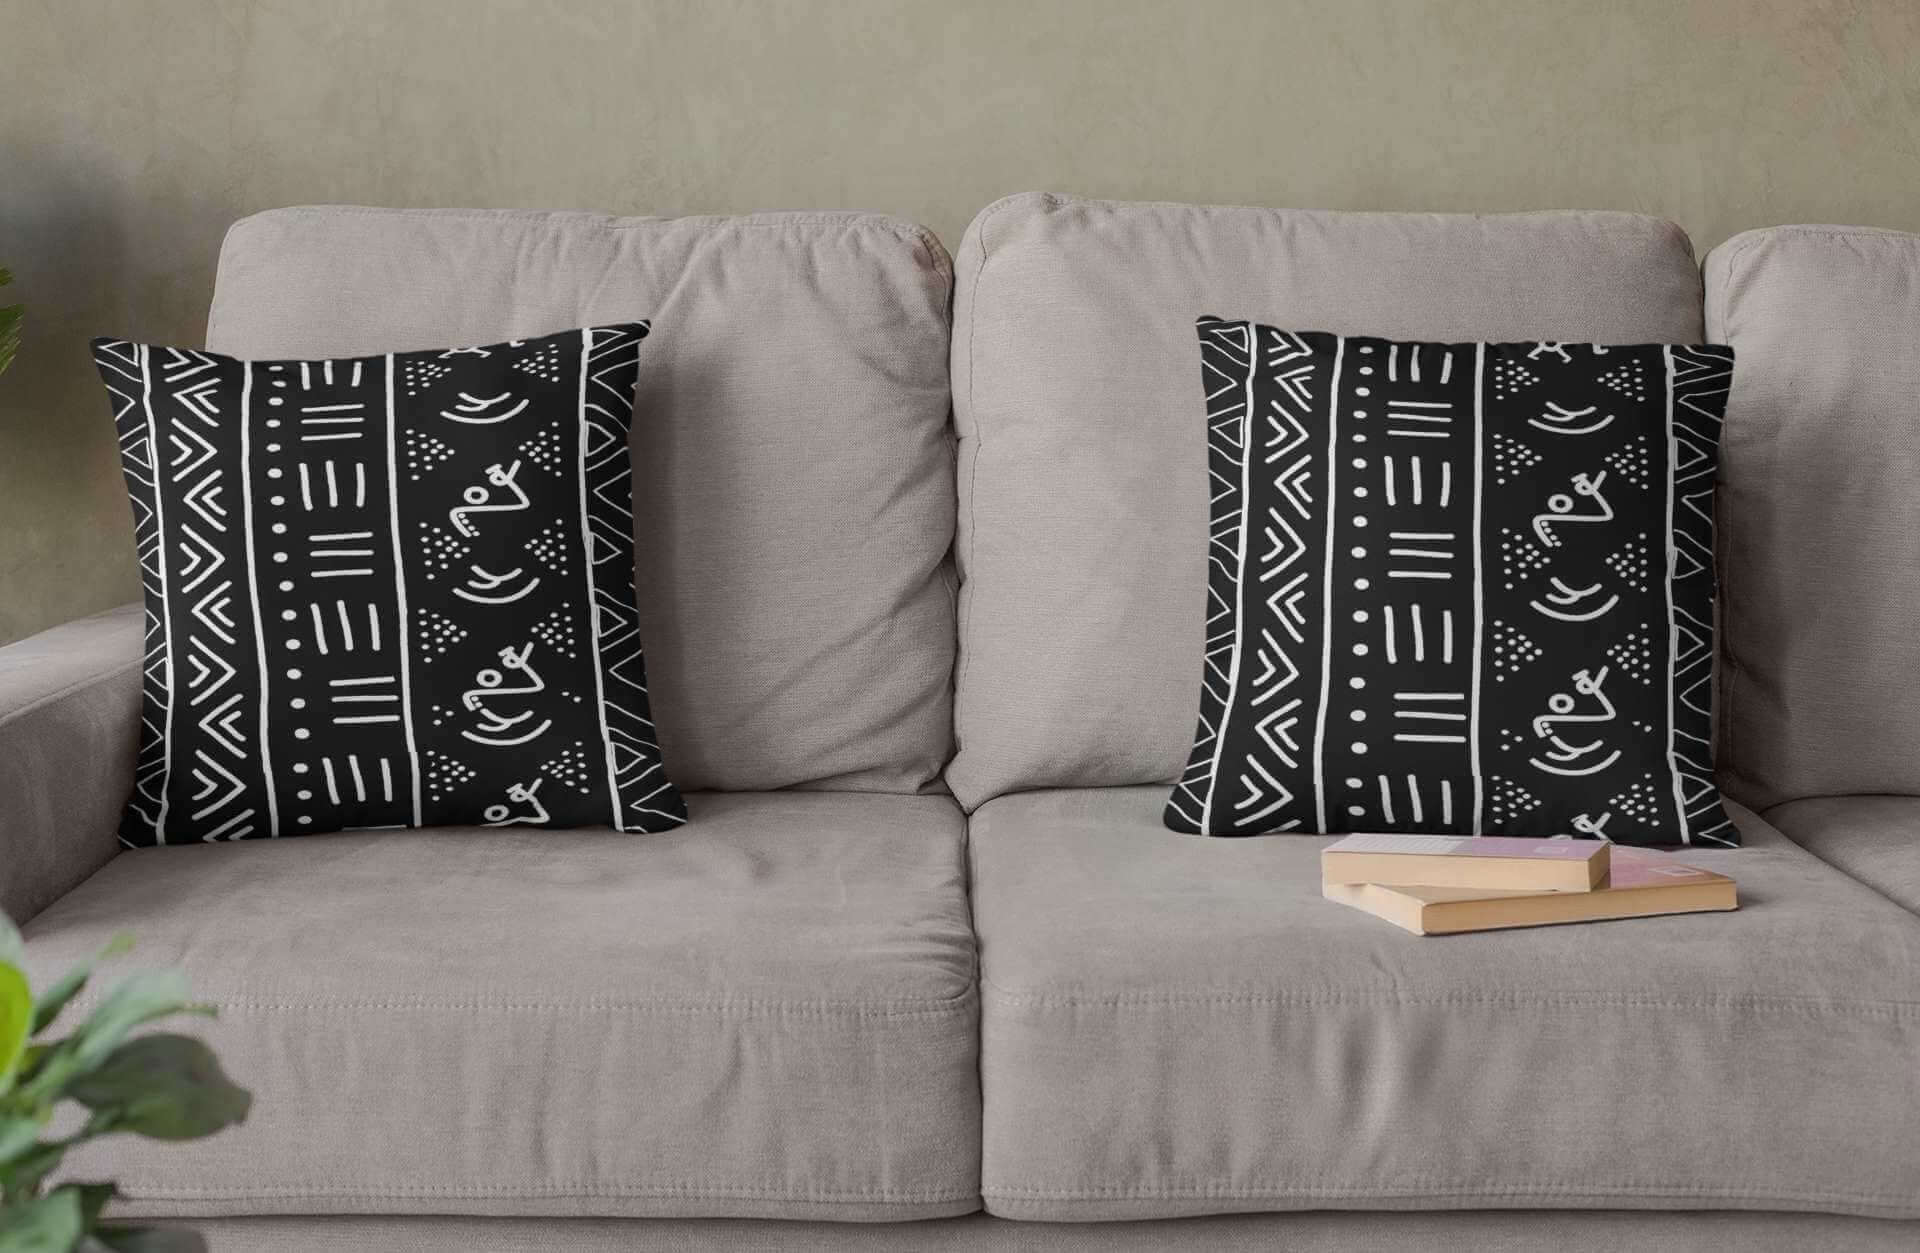 African Pillow Cases Throw Cushion Cover Set in Black White